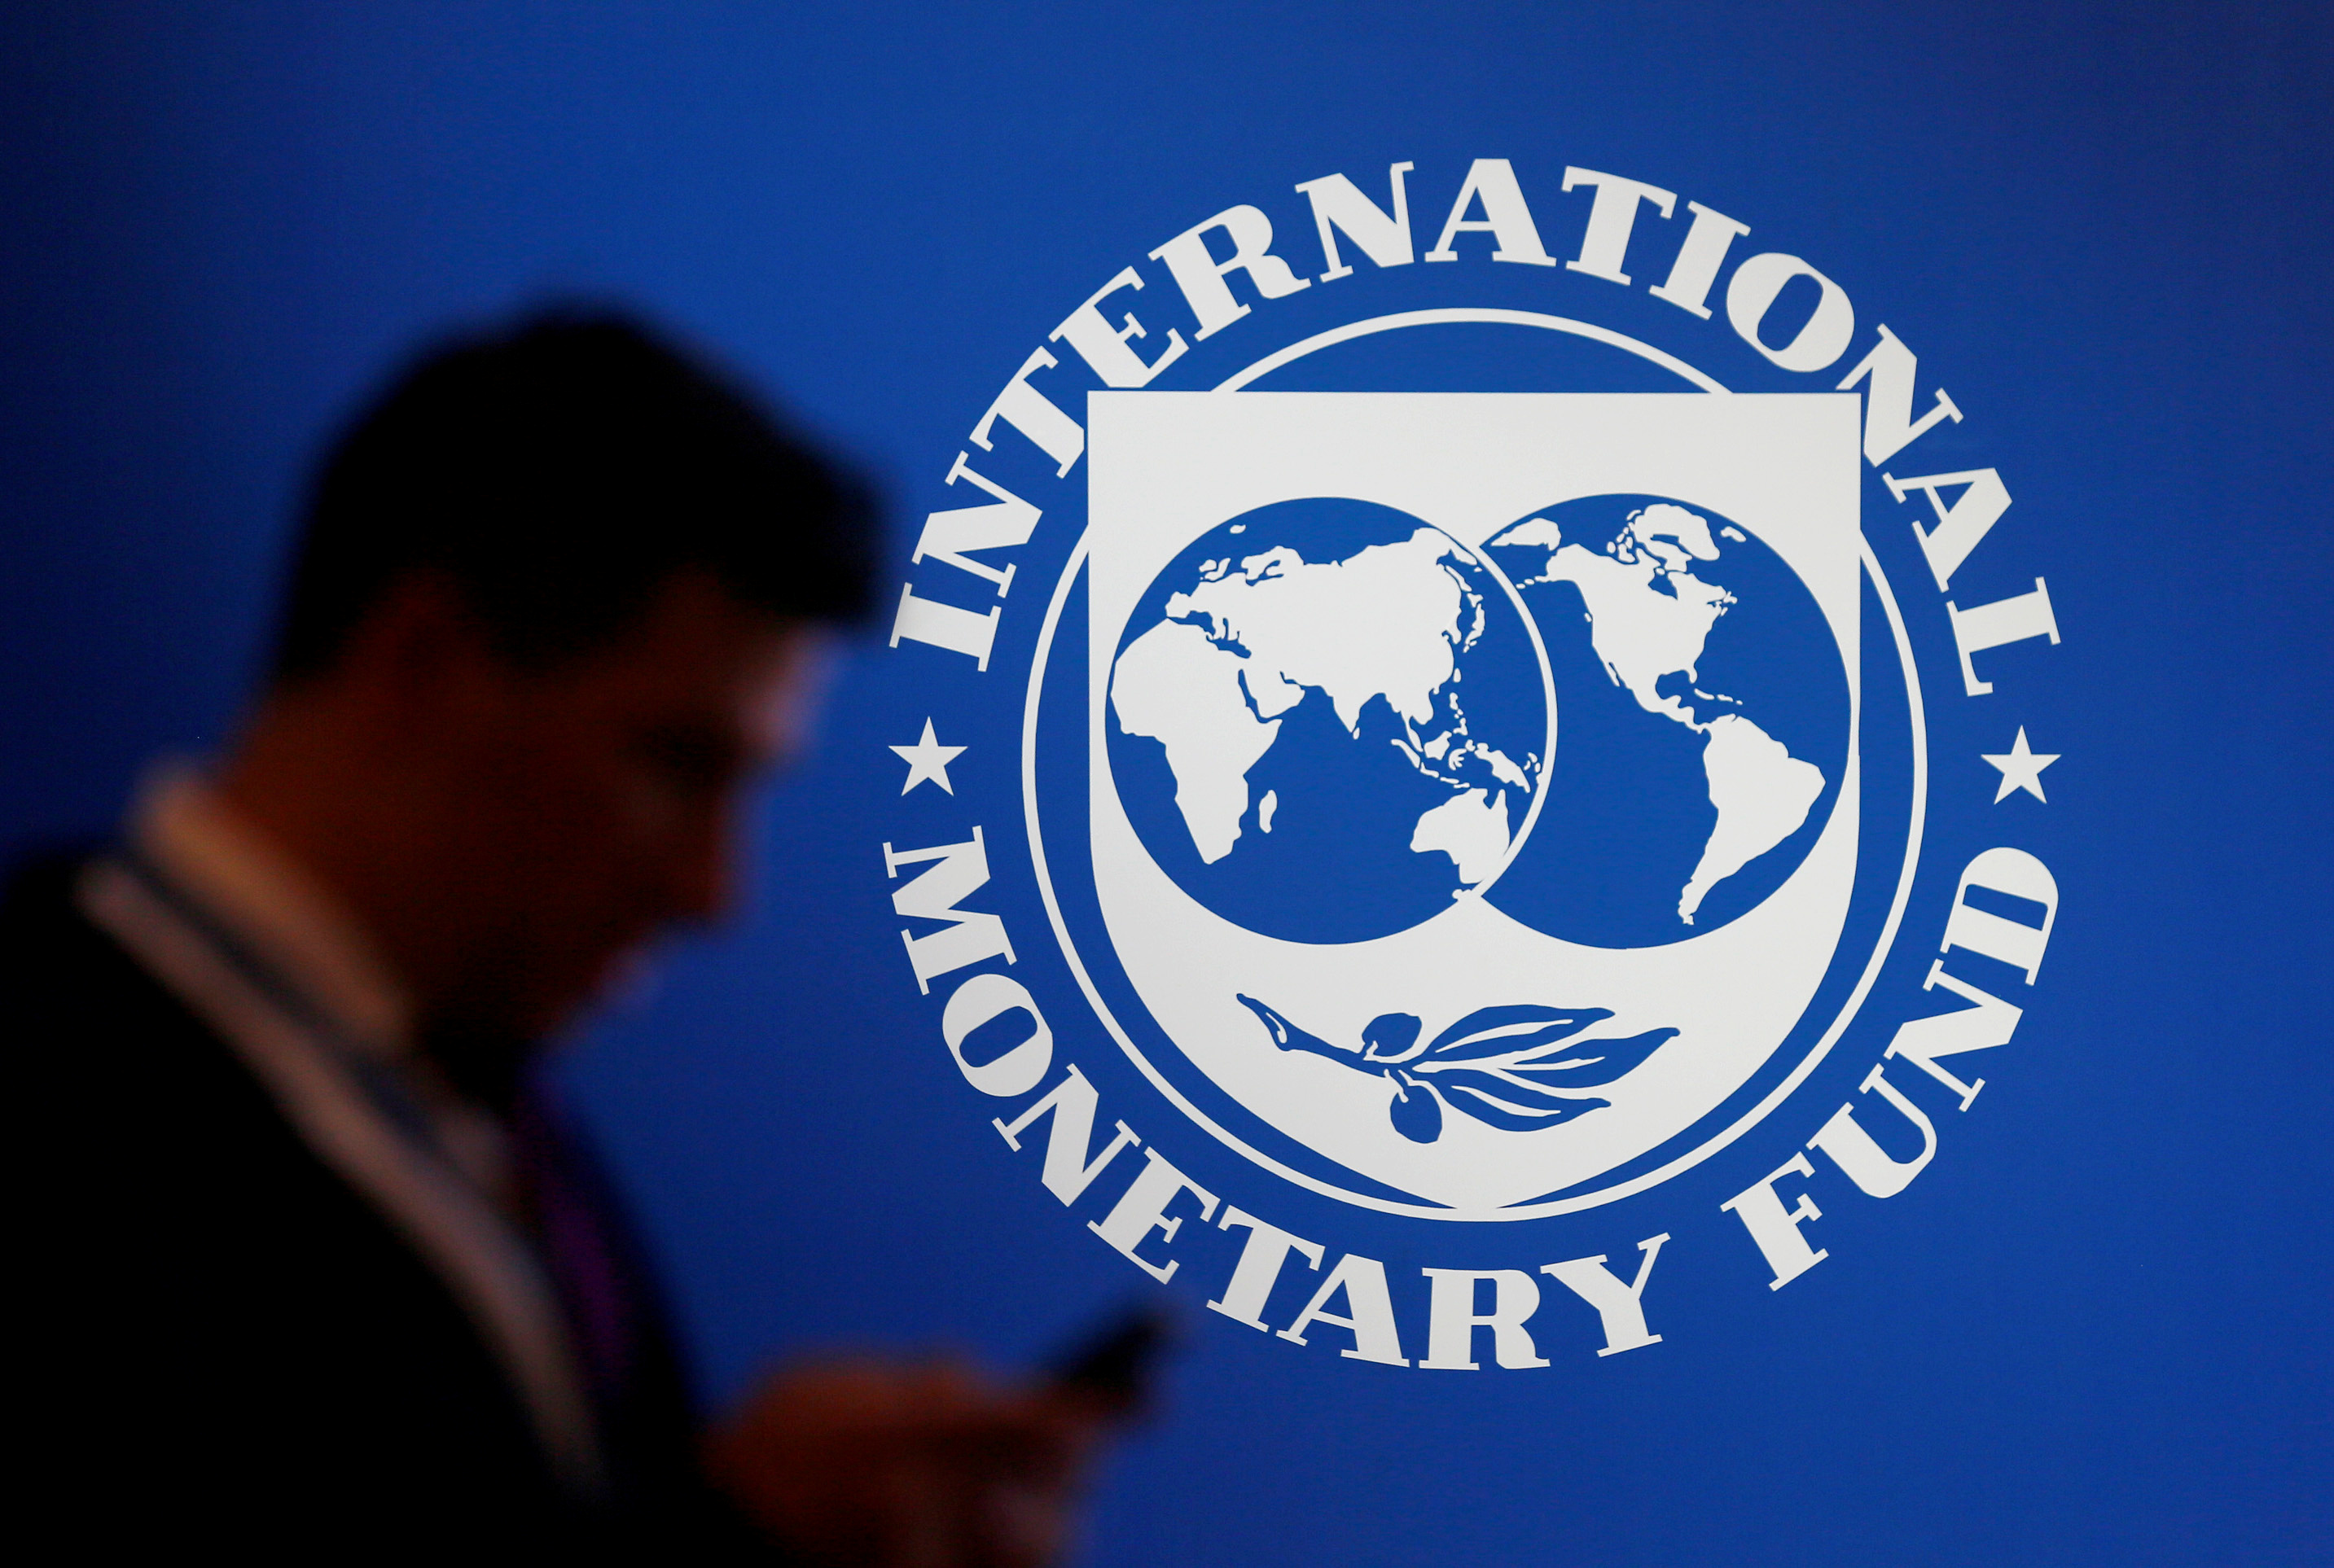 IMF: The decision on the confiscation of frozen assets of the Russian Federation should be made by the countries themselves